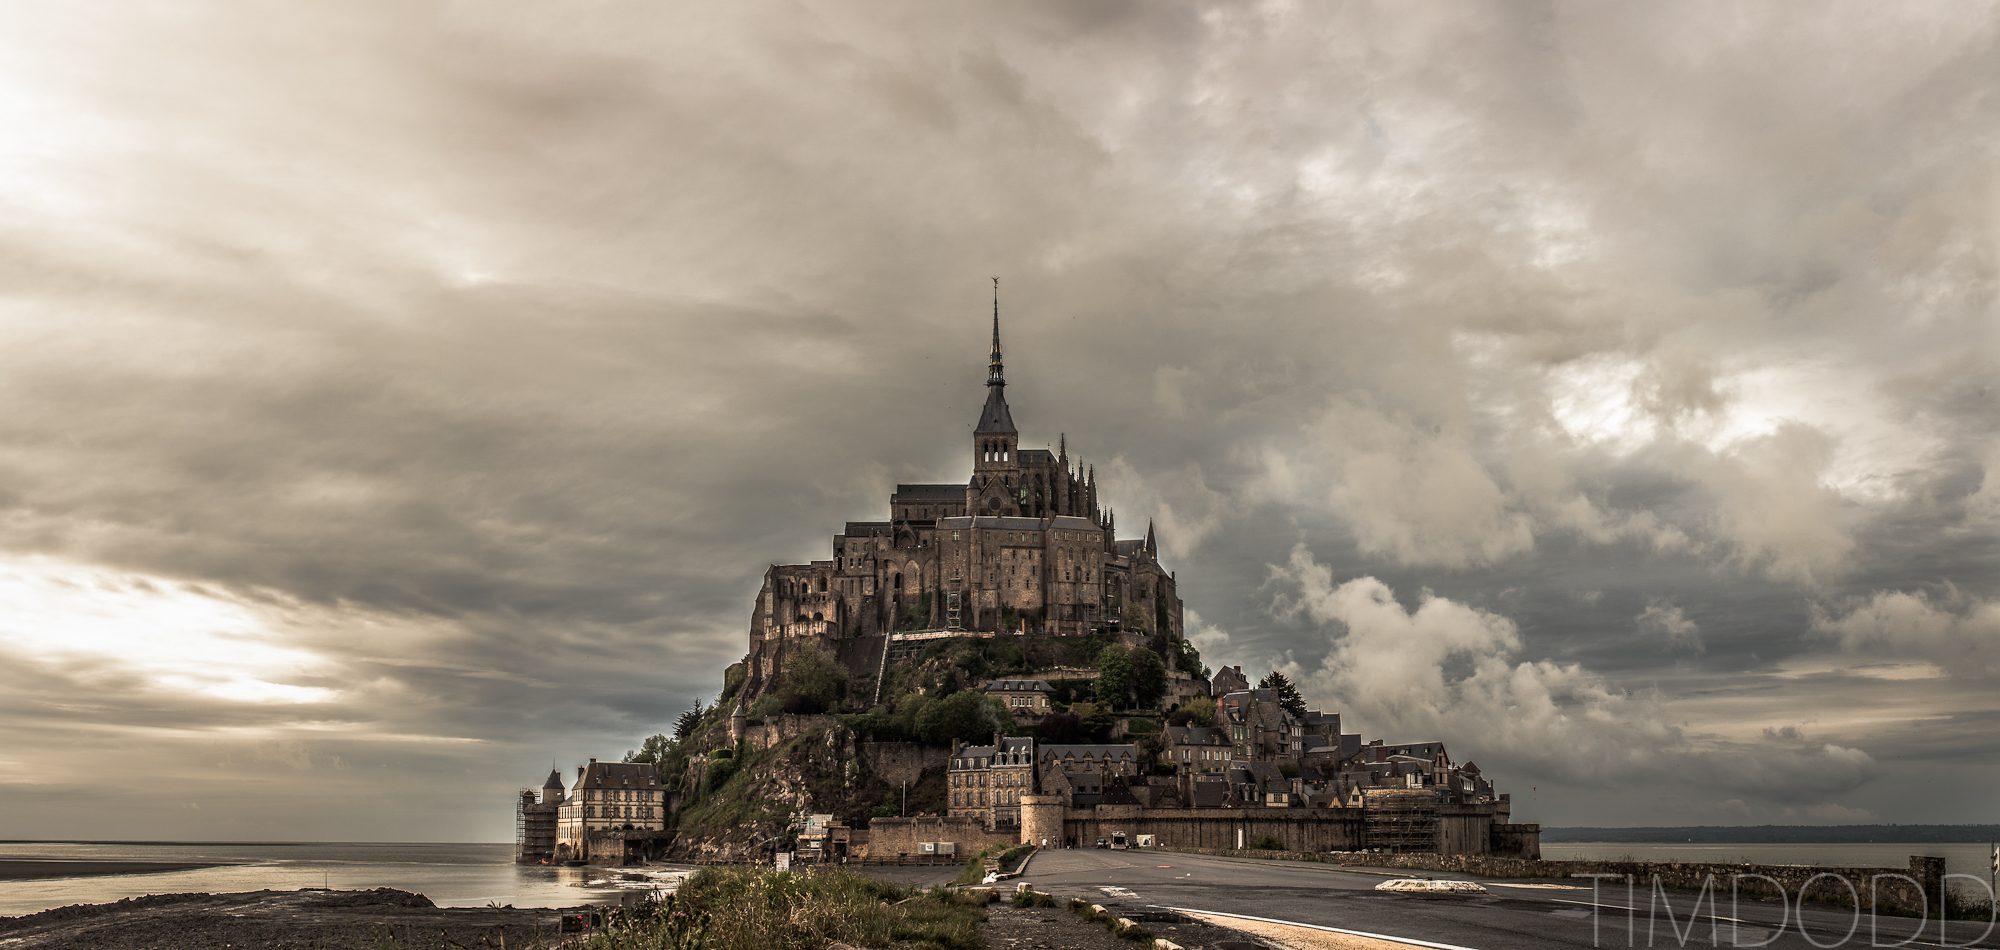 Mont Saint Michel, France, Tim Dodd Photography, Cedar Falls, Iowa 2 Travel to Europe for cheap, top 10 things to see in Europe, must see, photographers guide, photographs, best pictures,